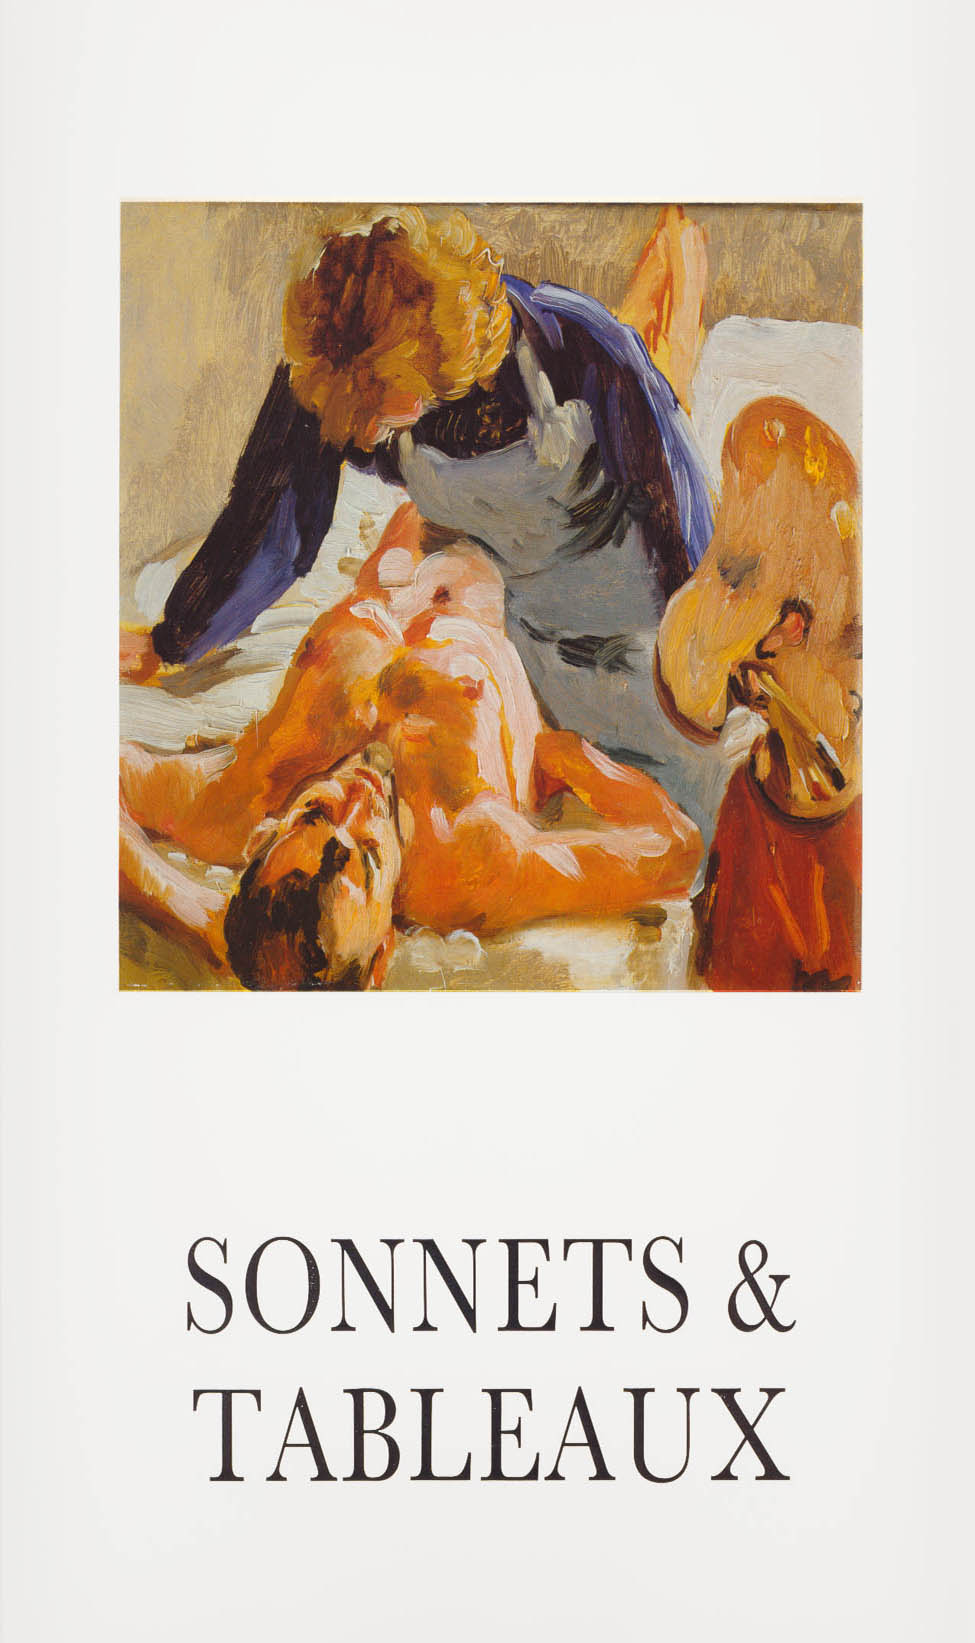 Sonnets & Tableaux by Thomas Meyer and Sandra Fisher